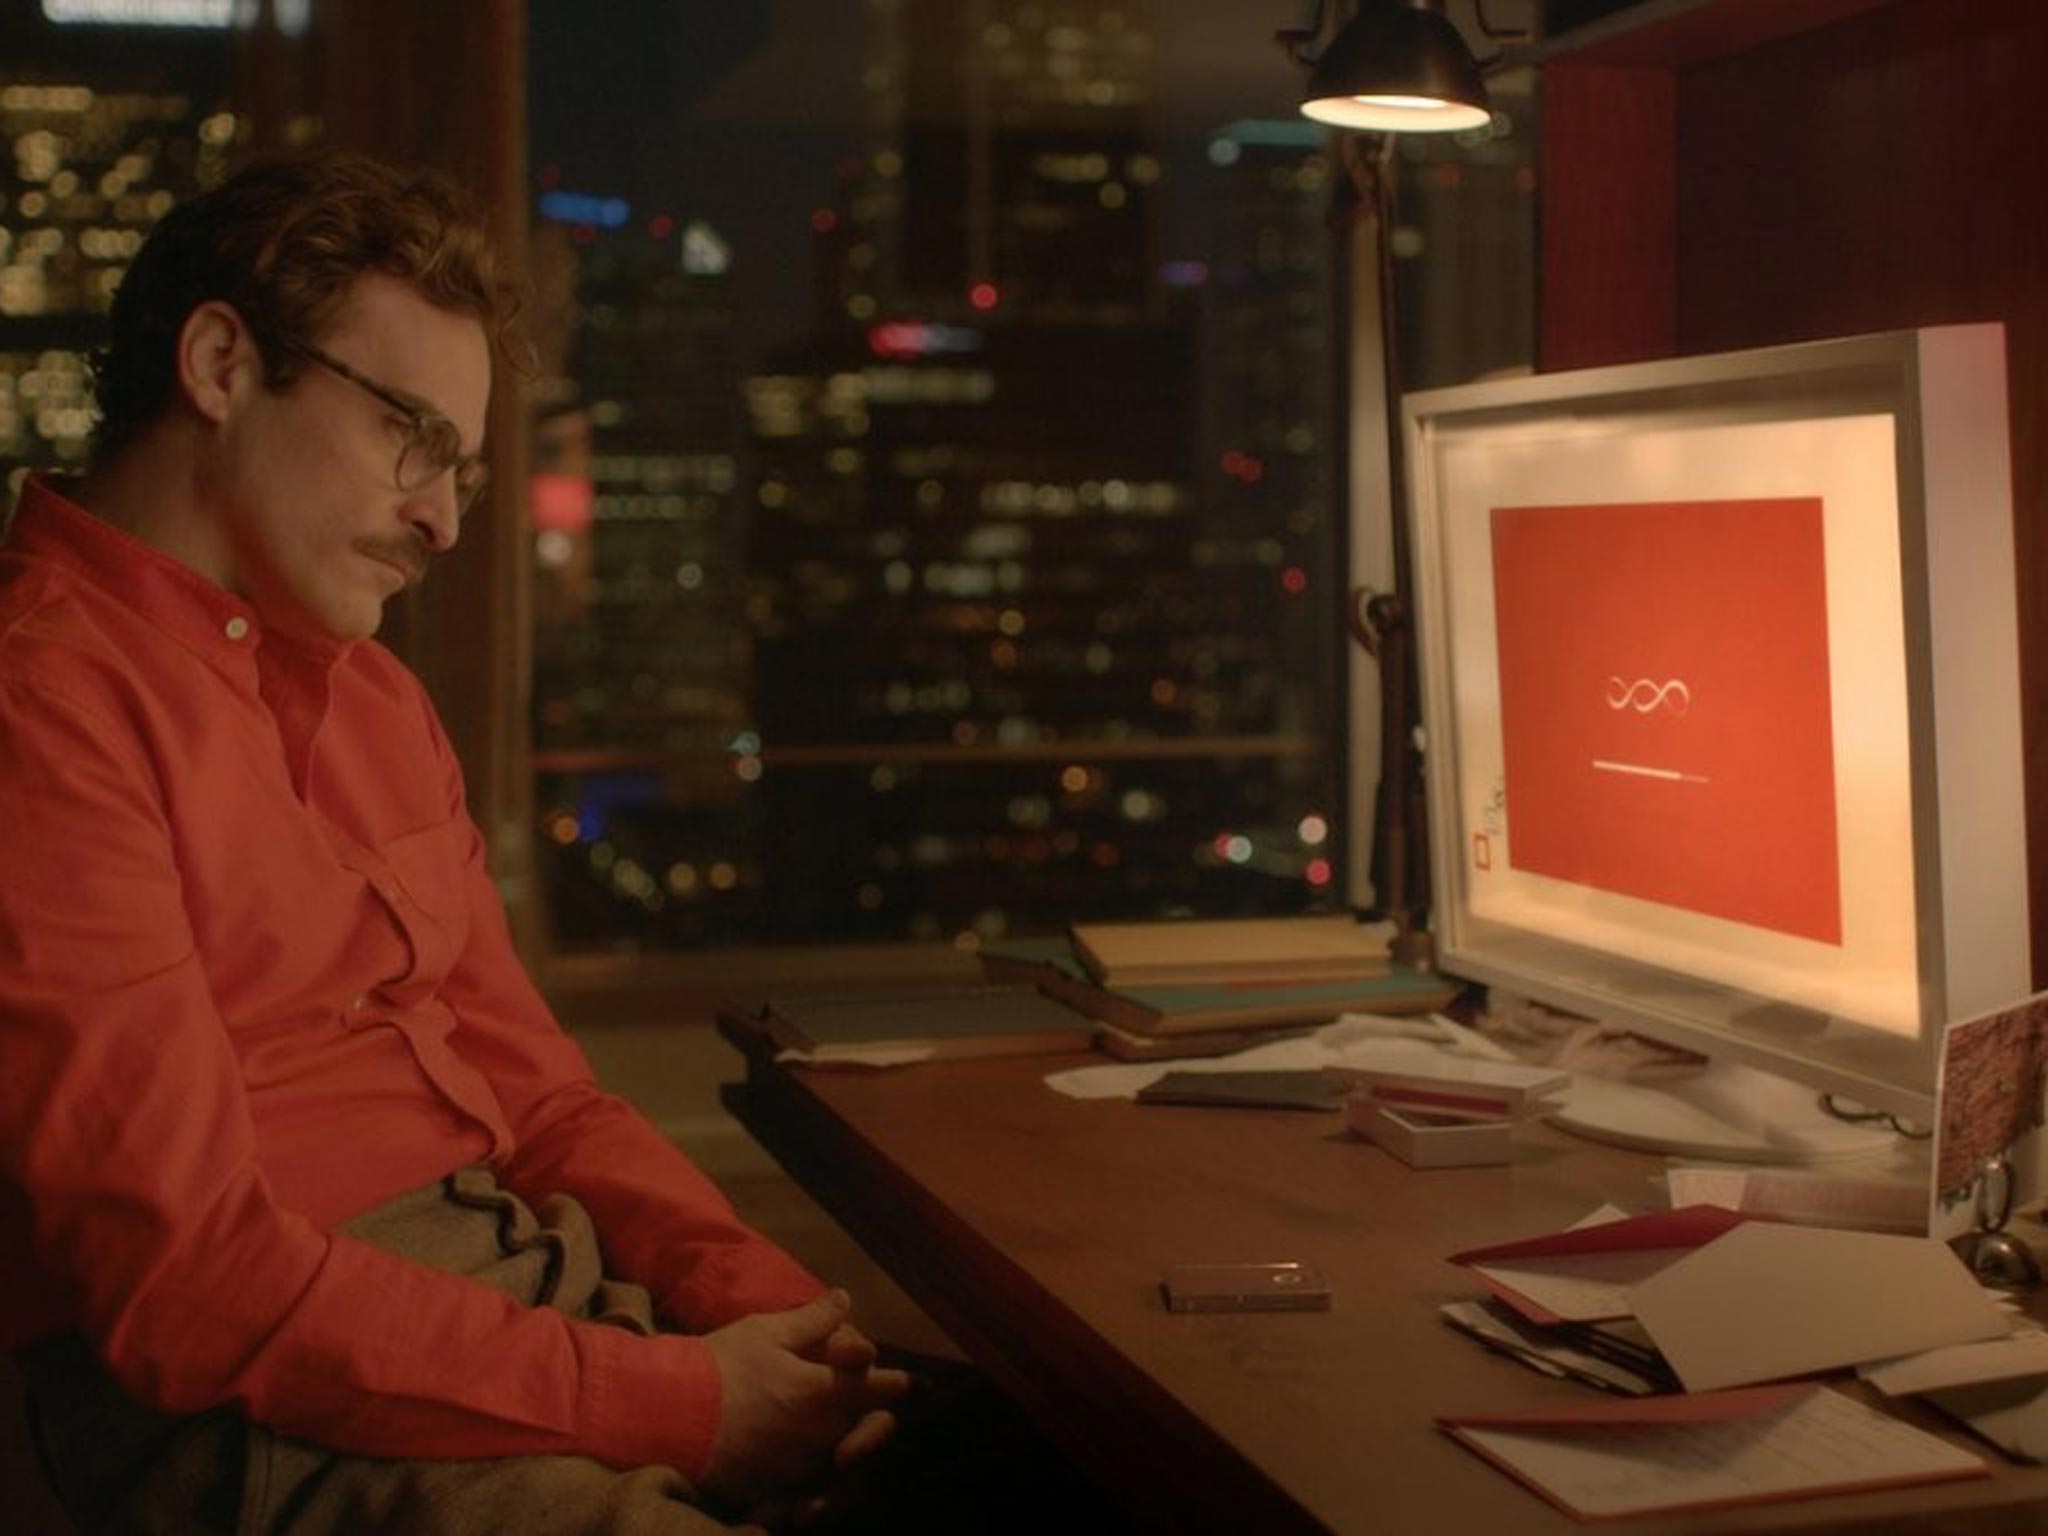 Joaquin Phoenix as Theodore Twombly, who falls in love with a computer, in ‘Her’